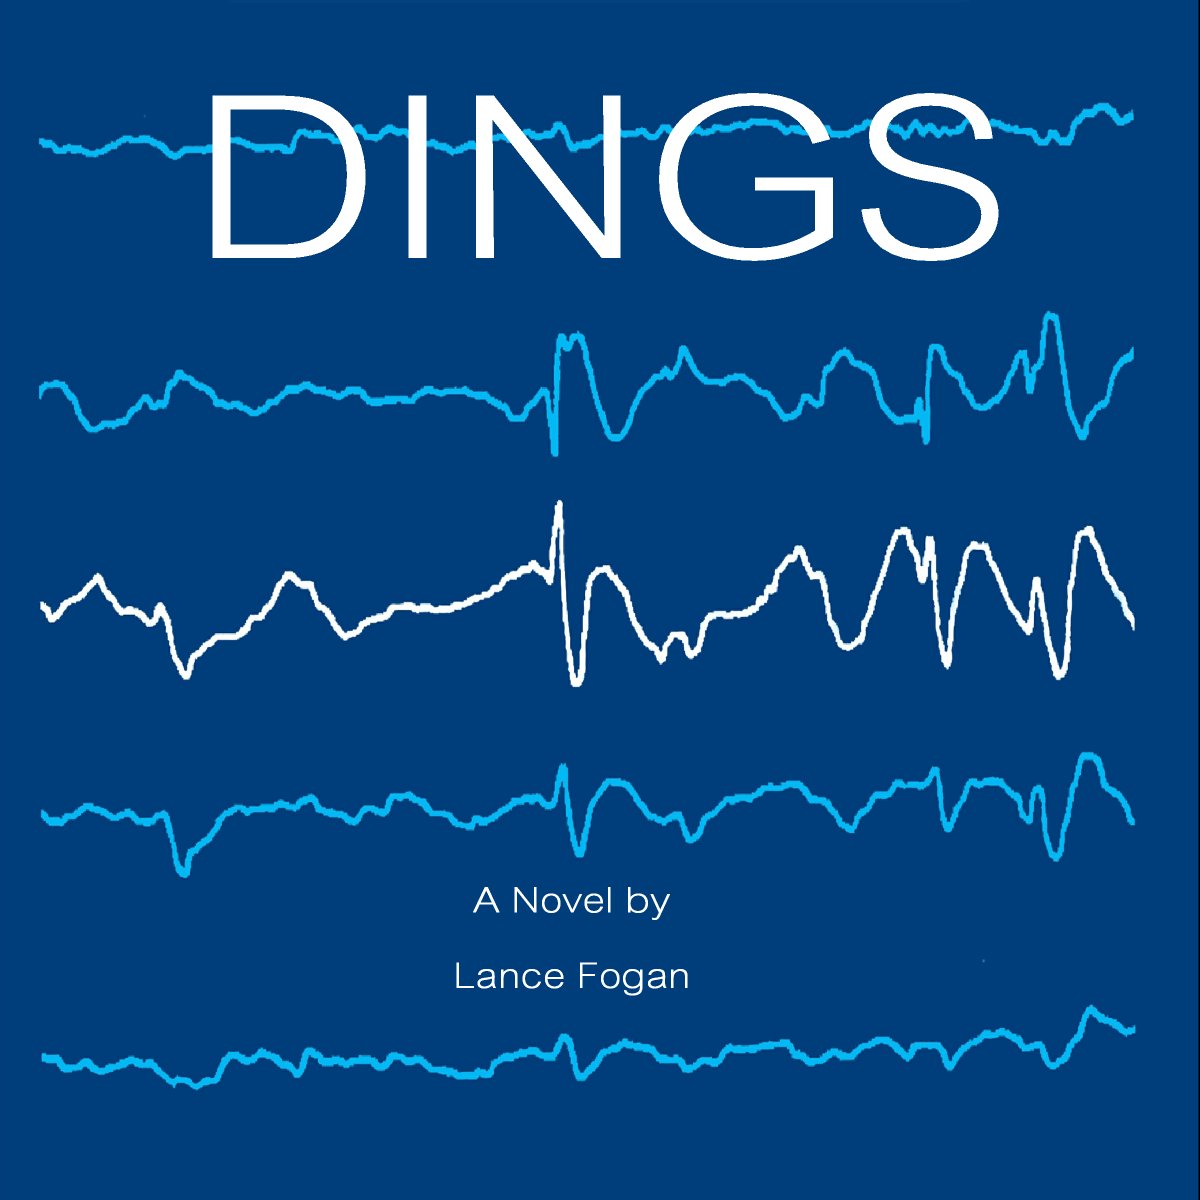 @rickpryll Thank you! My epilepsy novel #DINGS teaches important epilepsy info as it tells a family’s dramatic story about how they come to terms with a child’s epilepsy diagnosis. It is available in paperback, eBook & audiobook formats at most online booksellers. LanceFogan.com